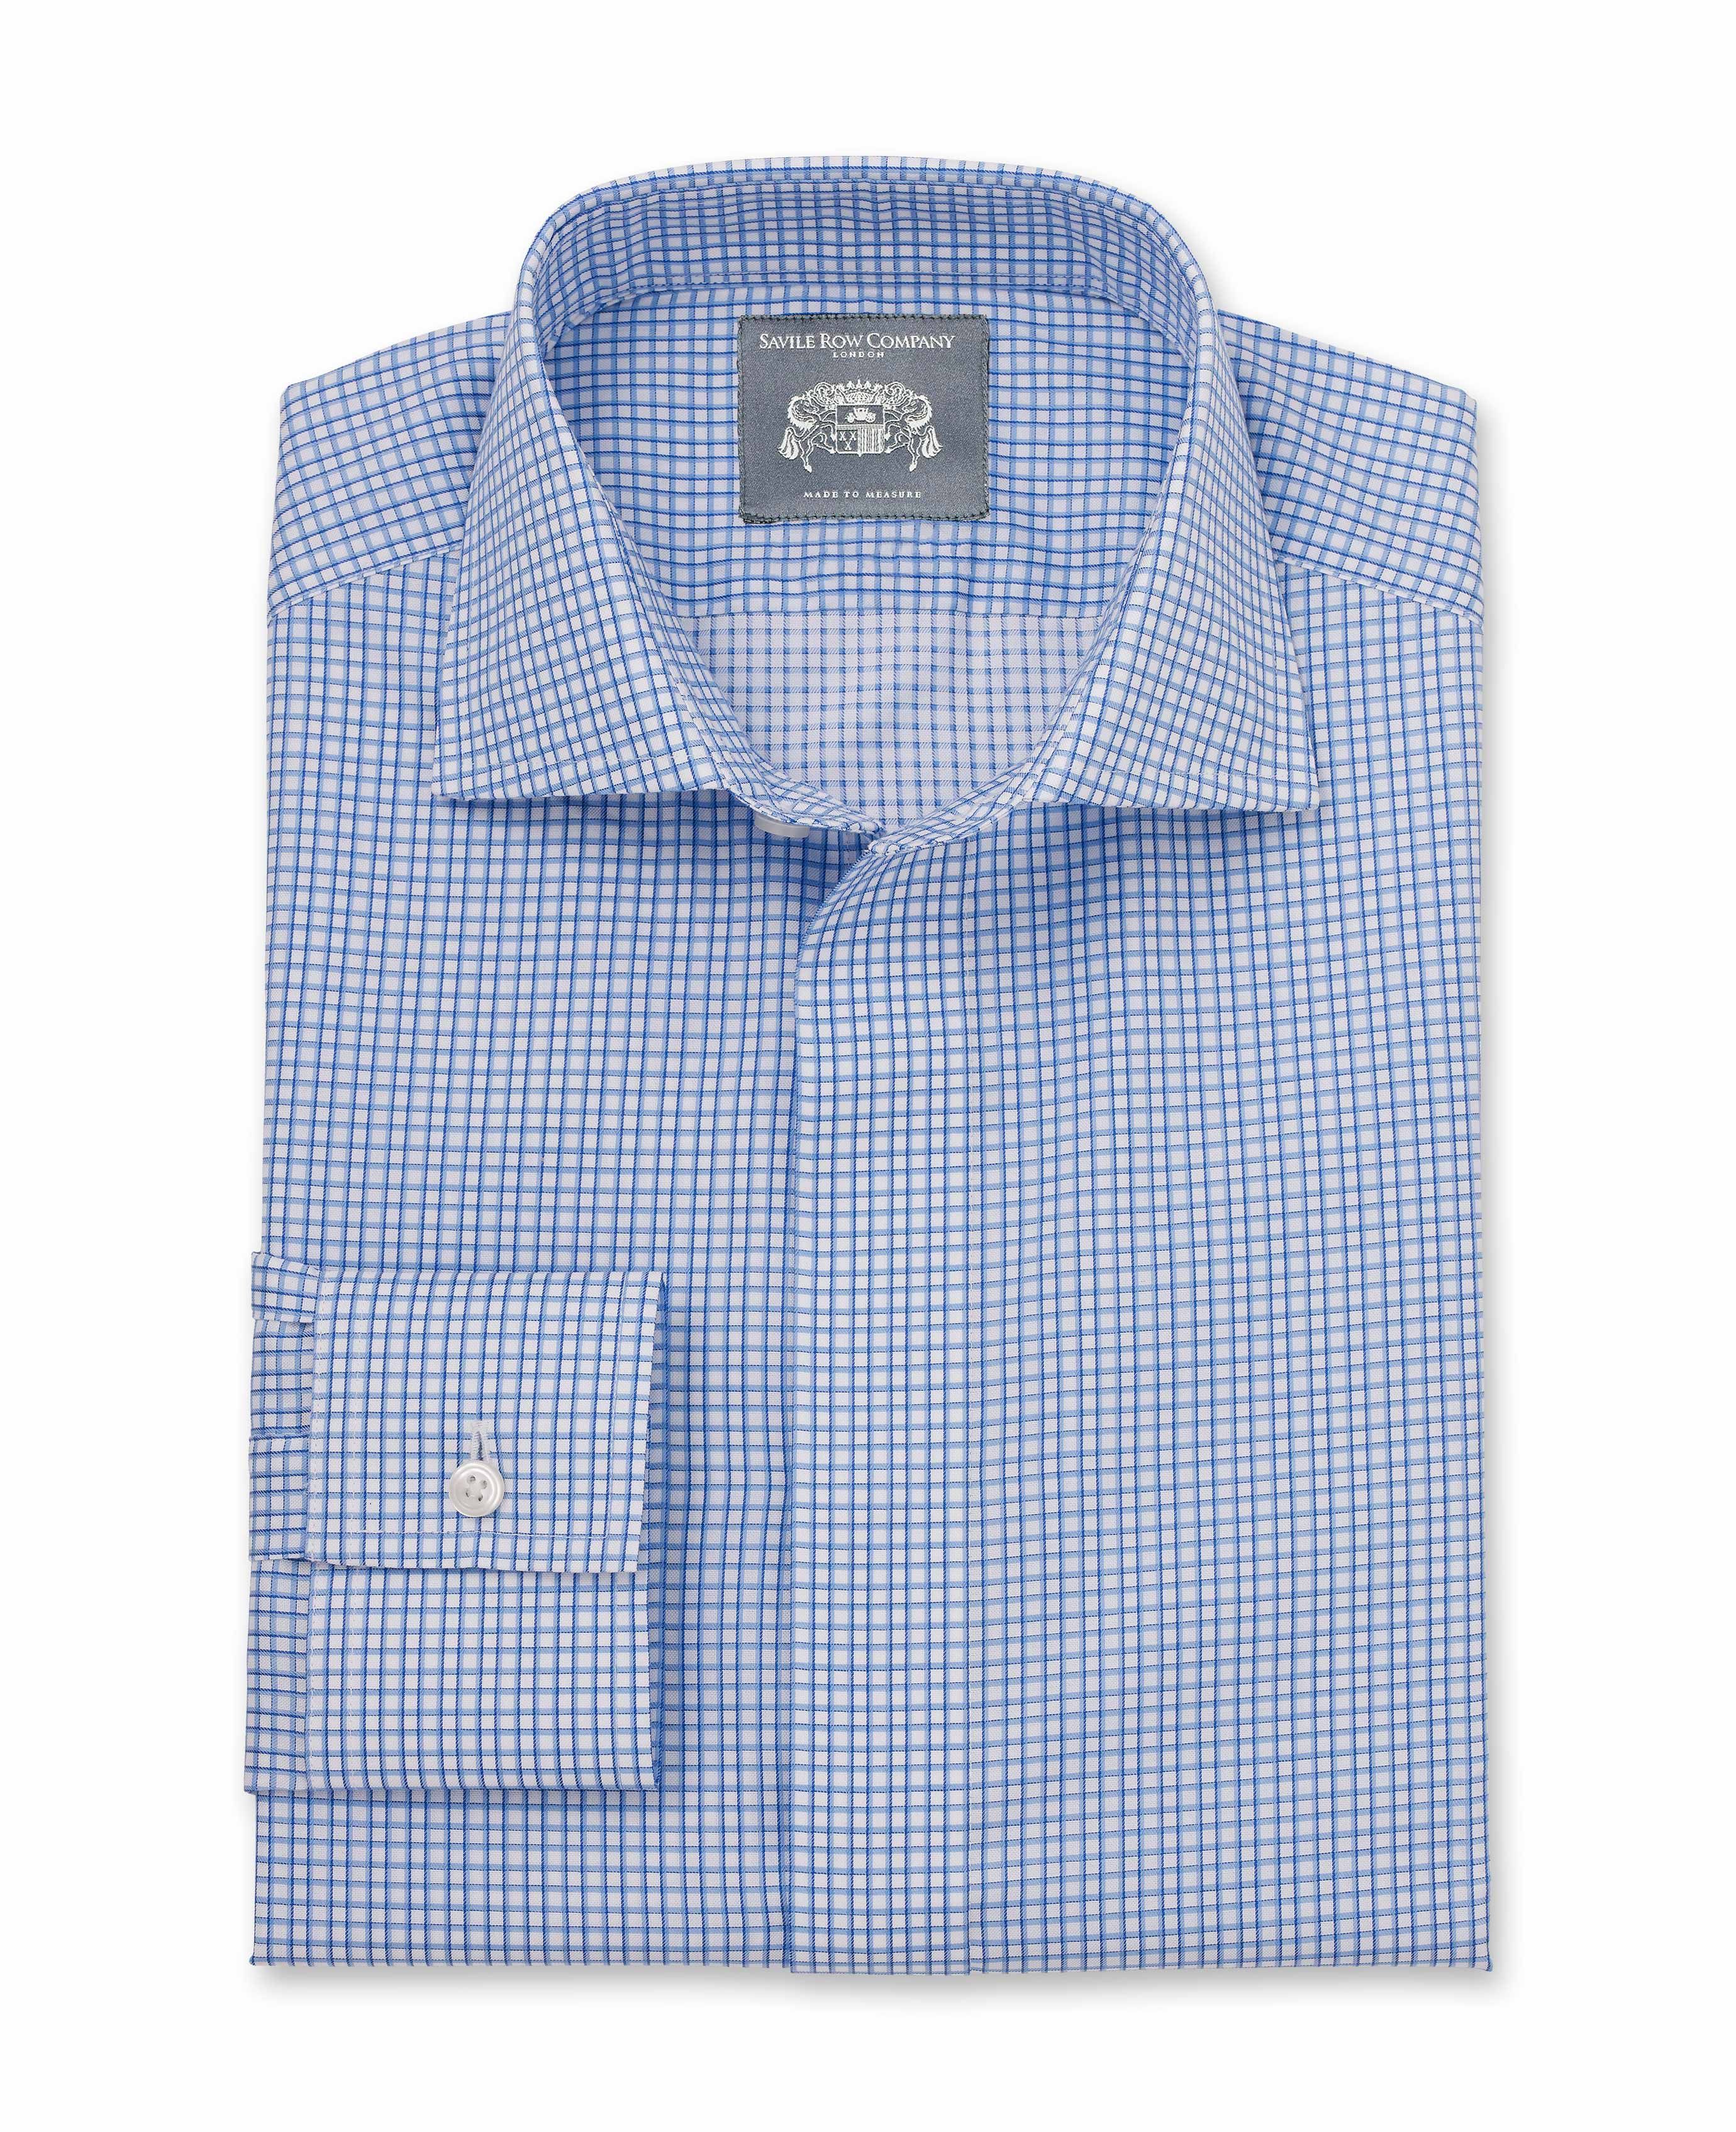 Ernest Blue White Check Made-to-Measure Shirt | Savile Row Co